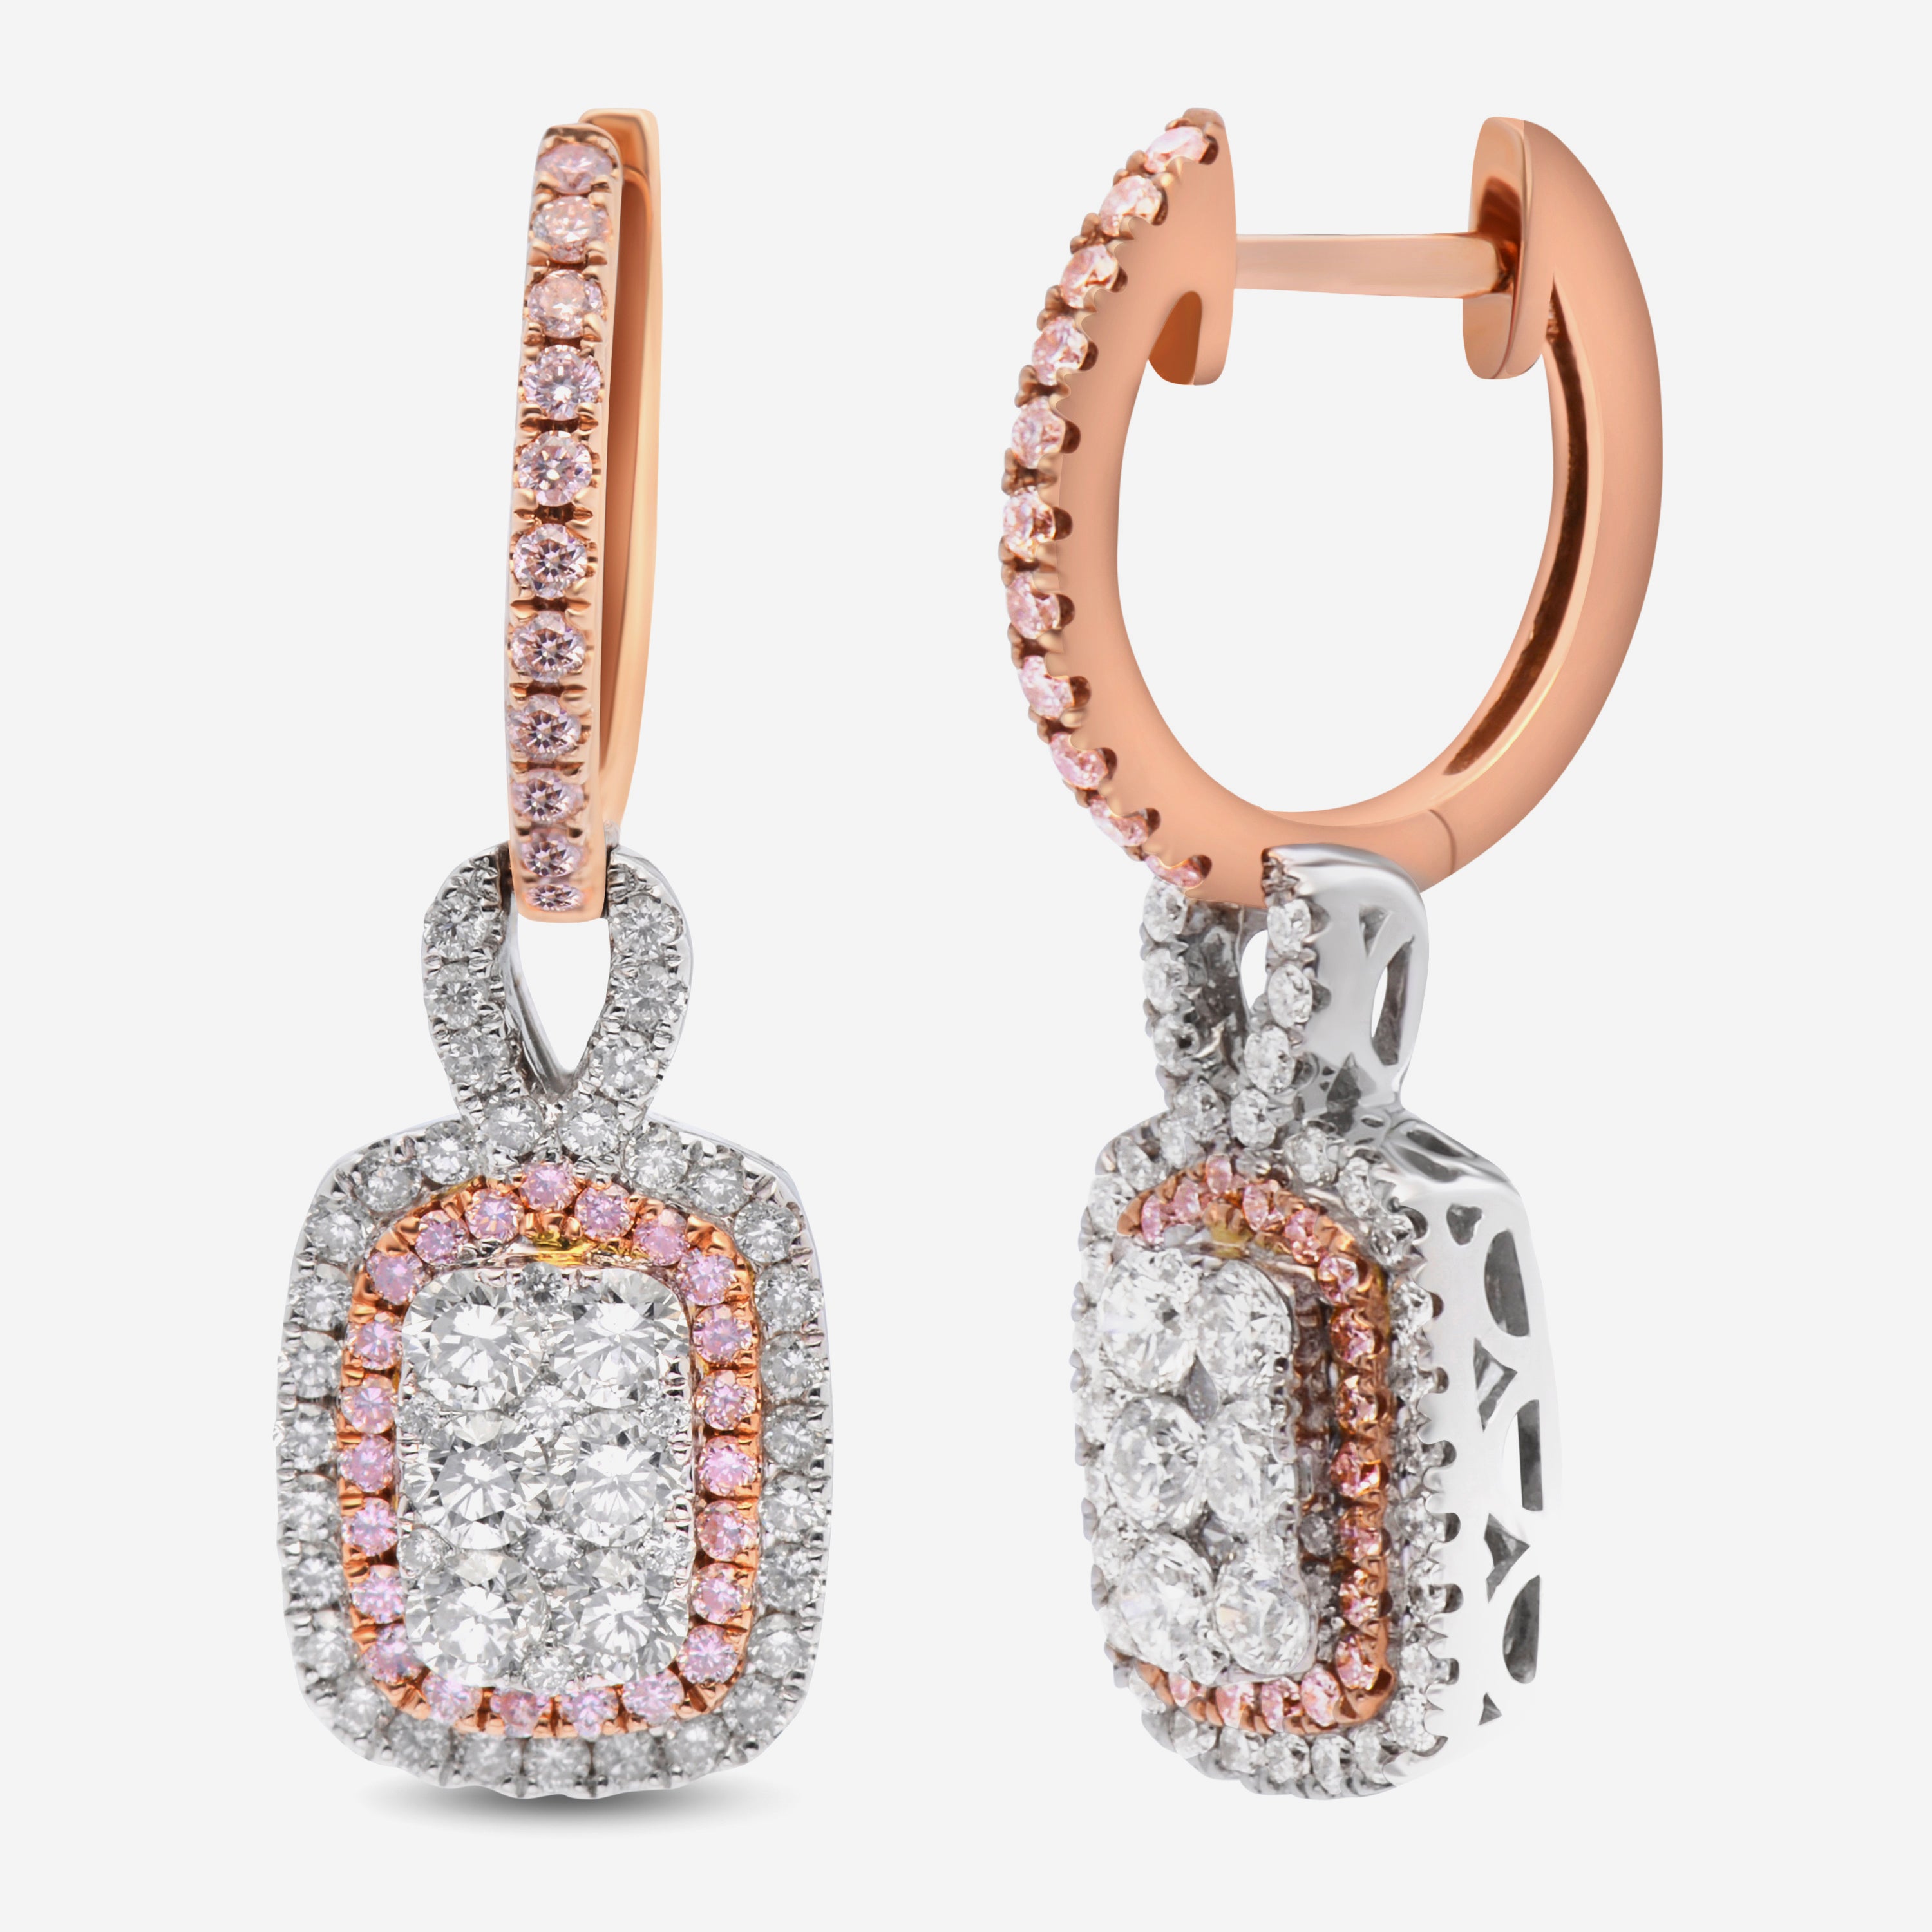 Gregg Ruth 14K White and Rose Gold, White Diamond and Fancy Pink Diamond Drop Earrings - THE SOLIST